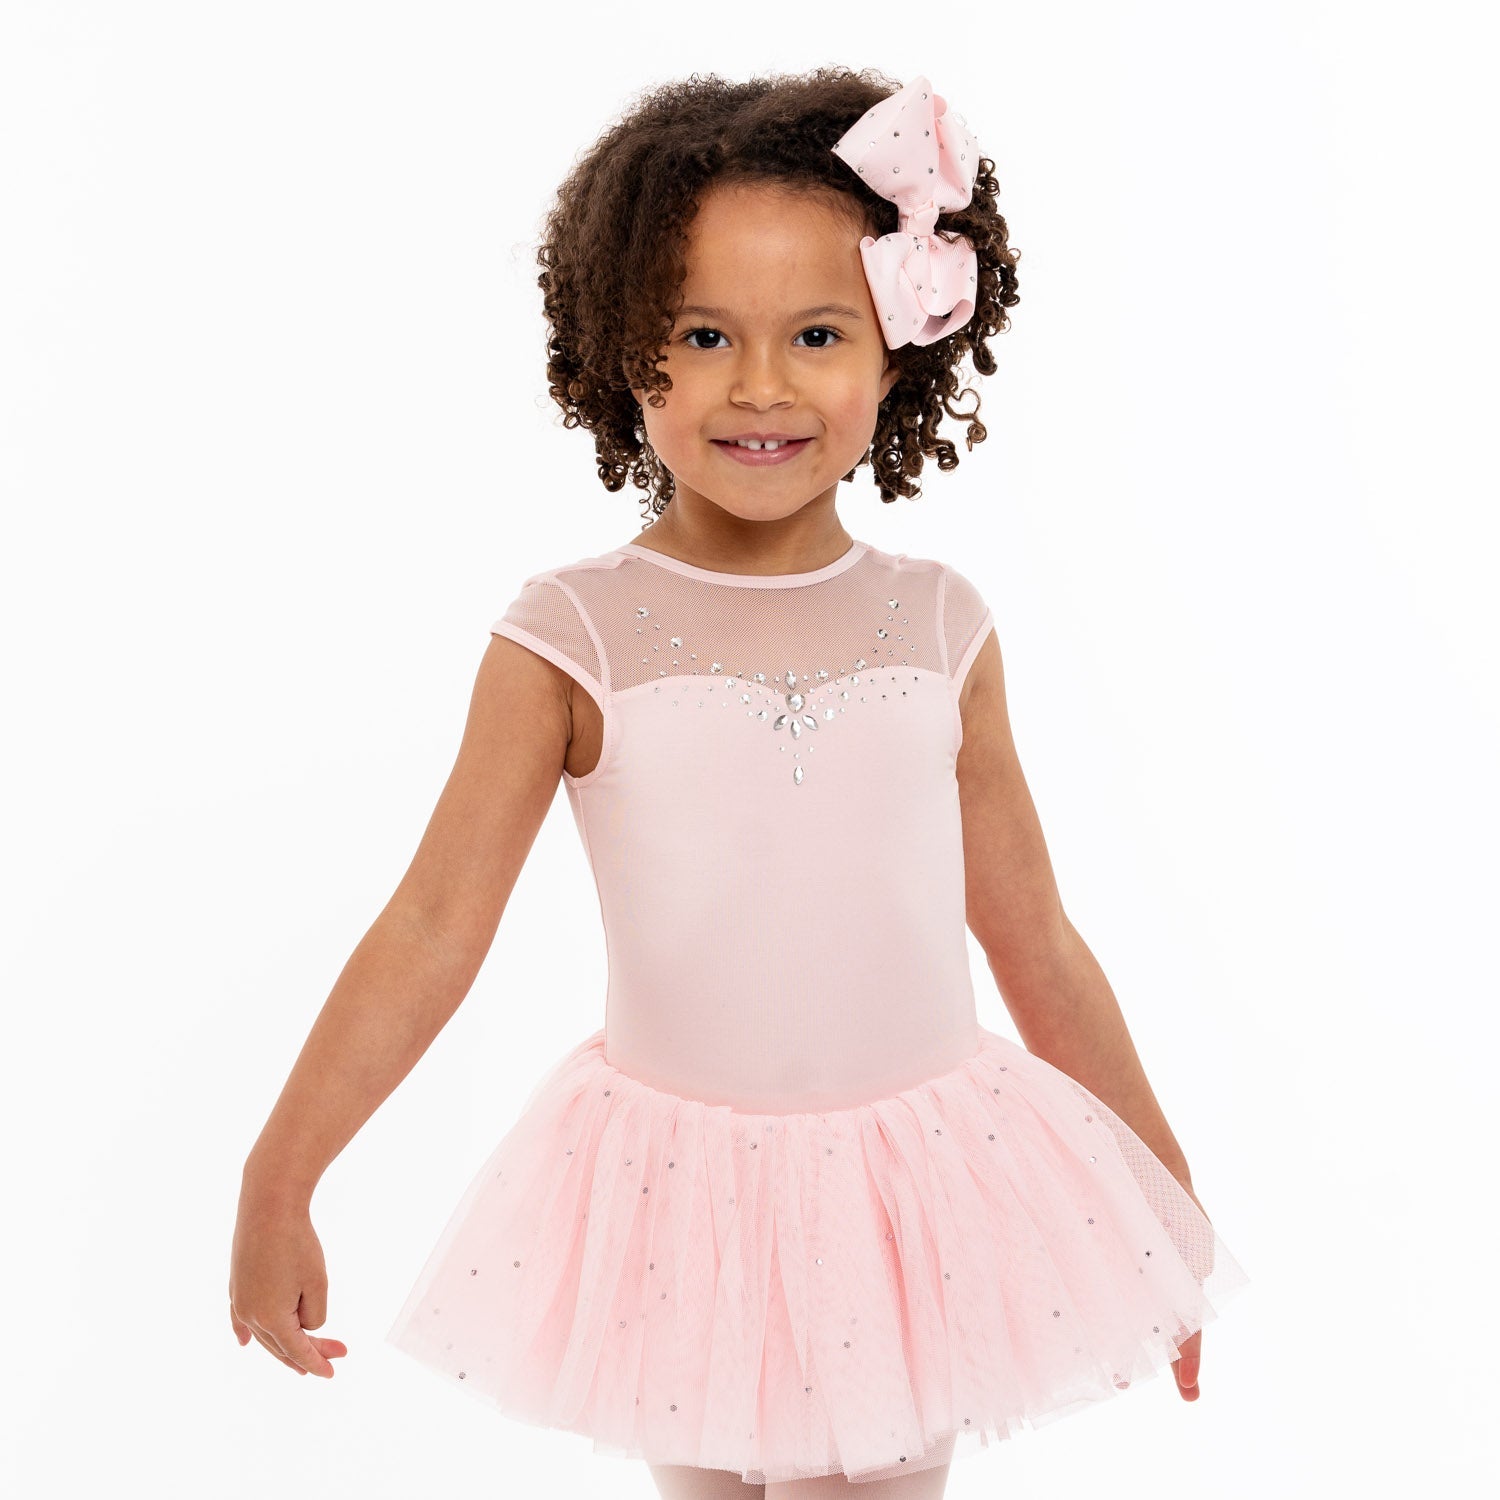 Flo Dancewear - Tuesdays are for tutus, tights and tippy-toes